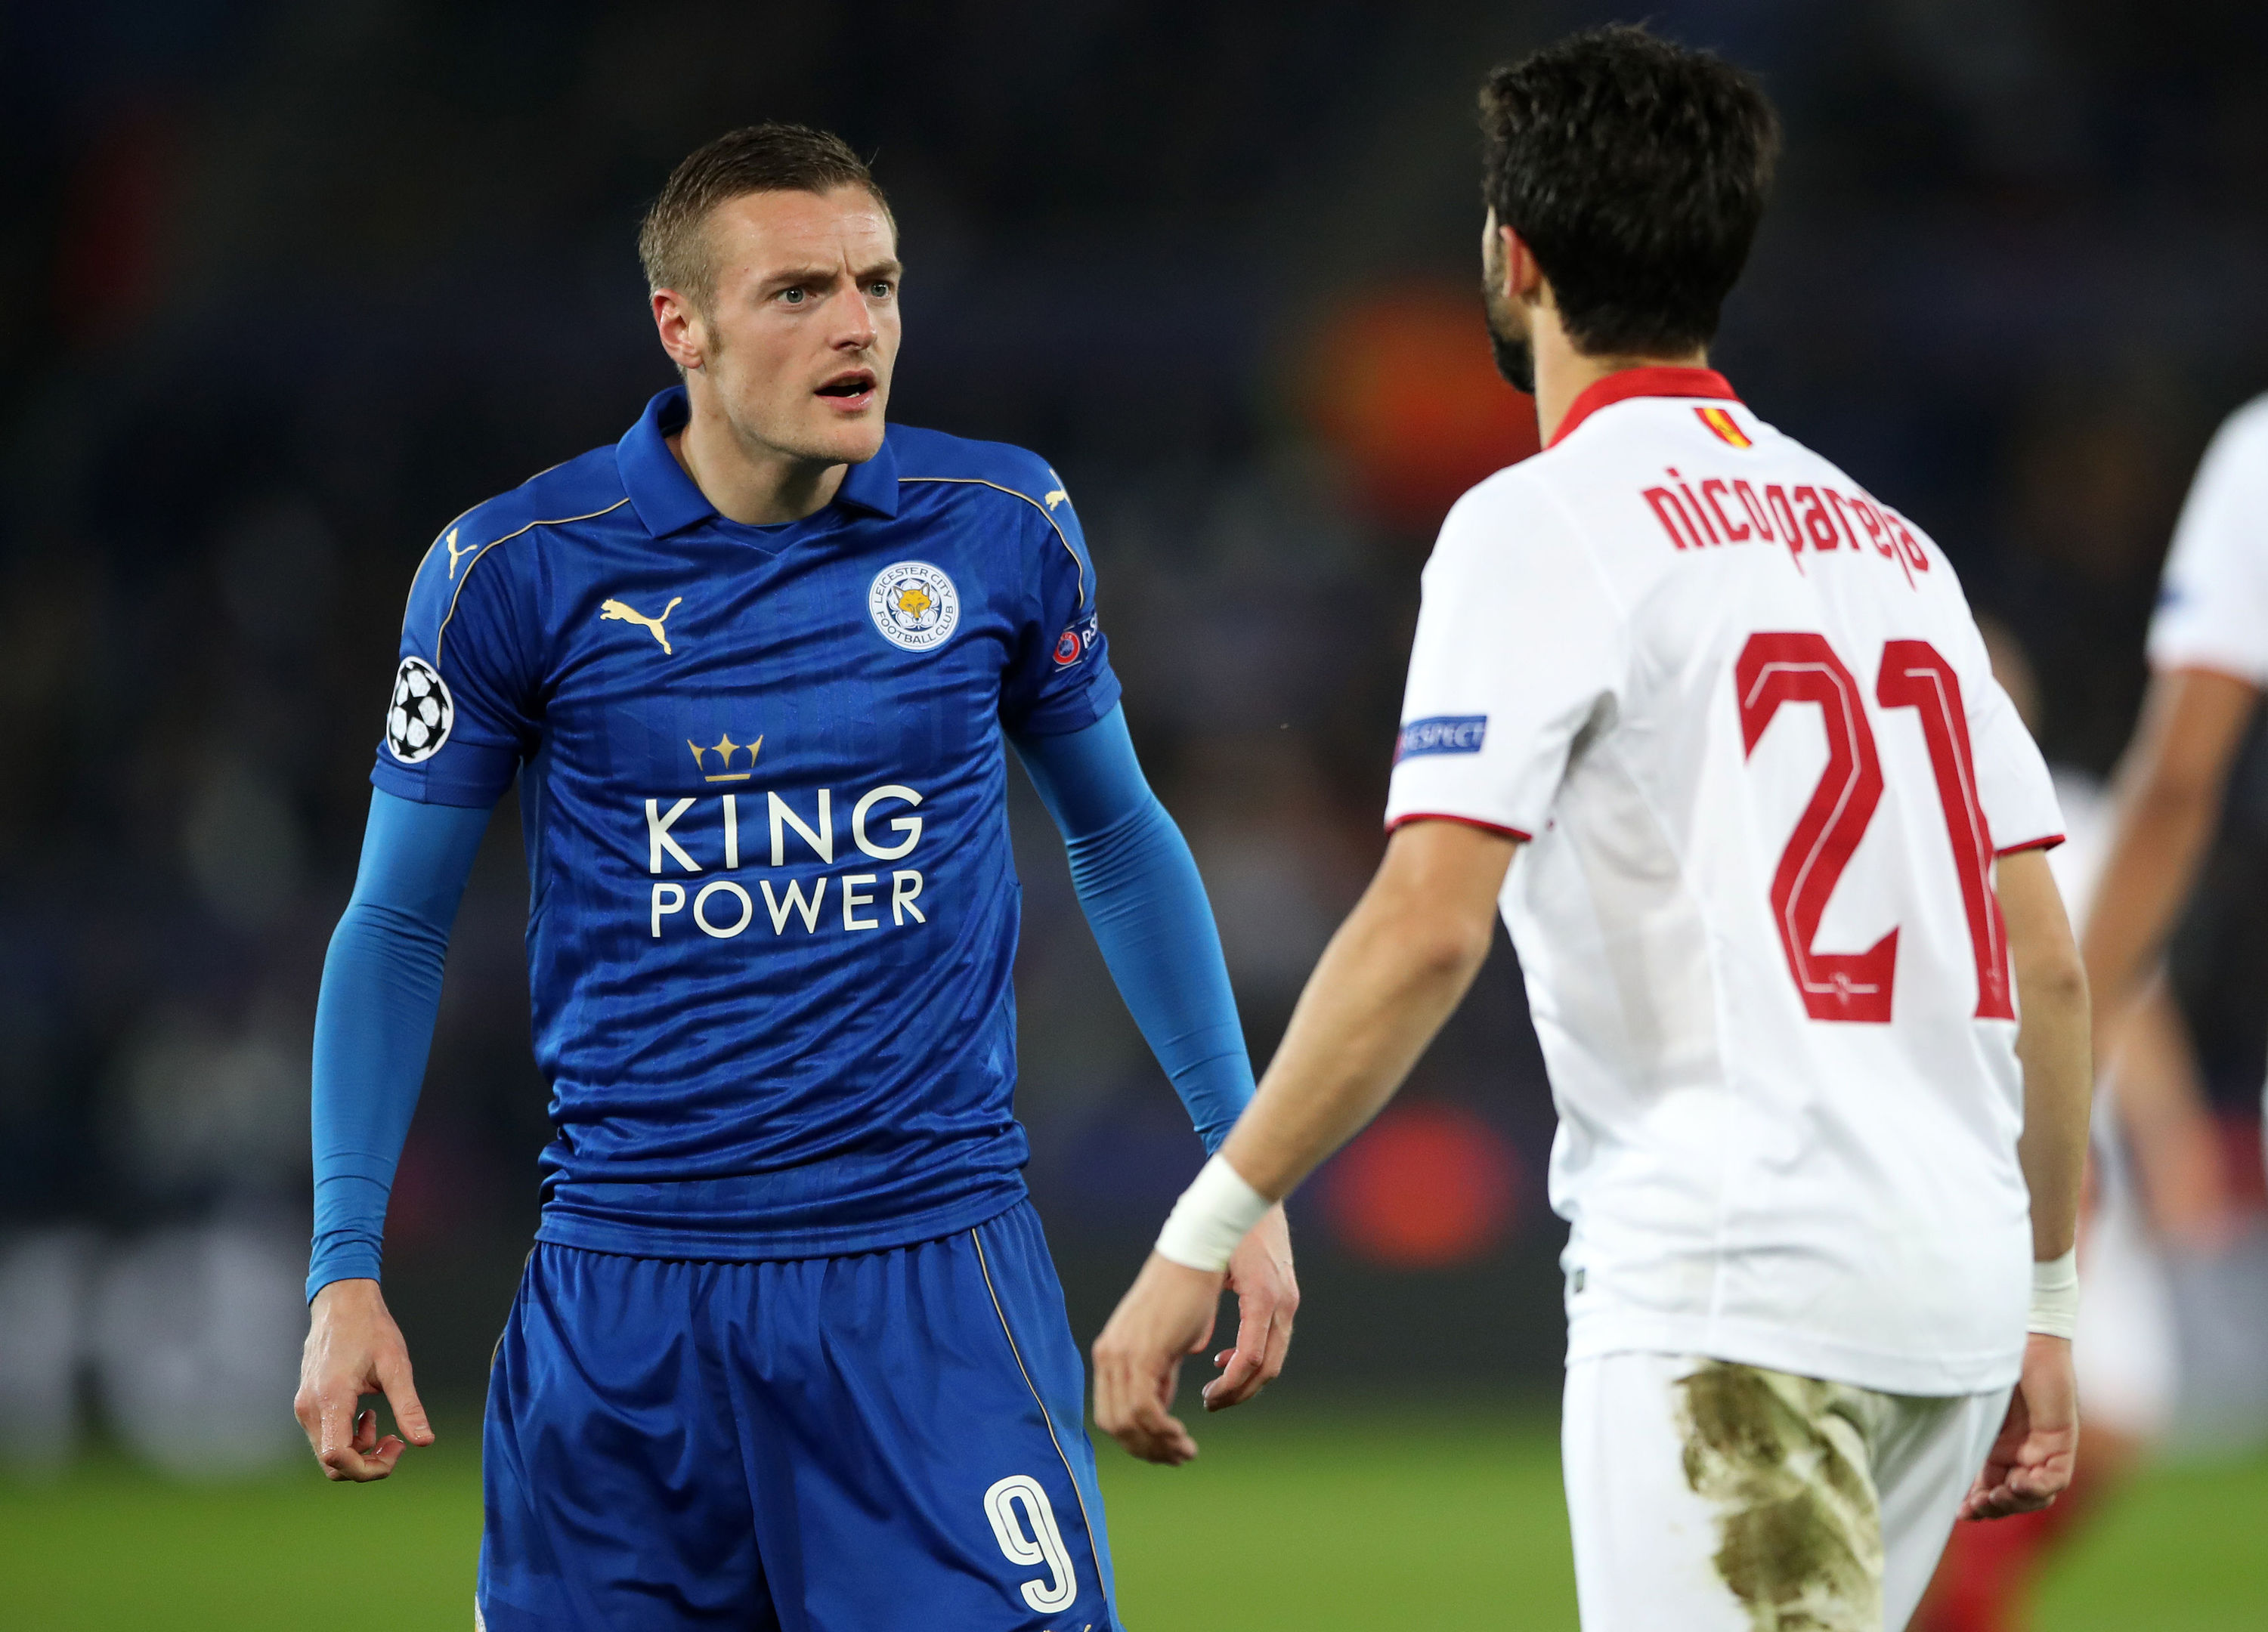 Tempers flare between Sevilla's Nicolas Pareja and Leicester City's Jamie Vardy during the UEFA Champions League (Nick Potts/PA Wire)